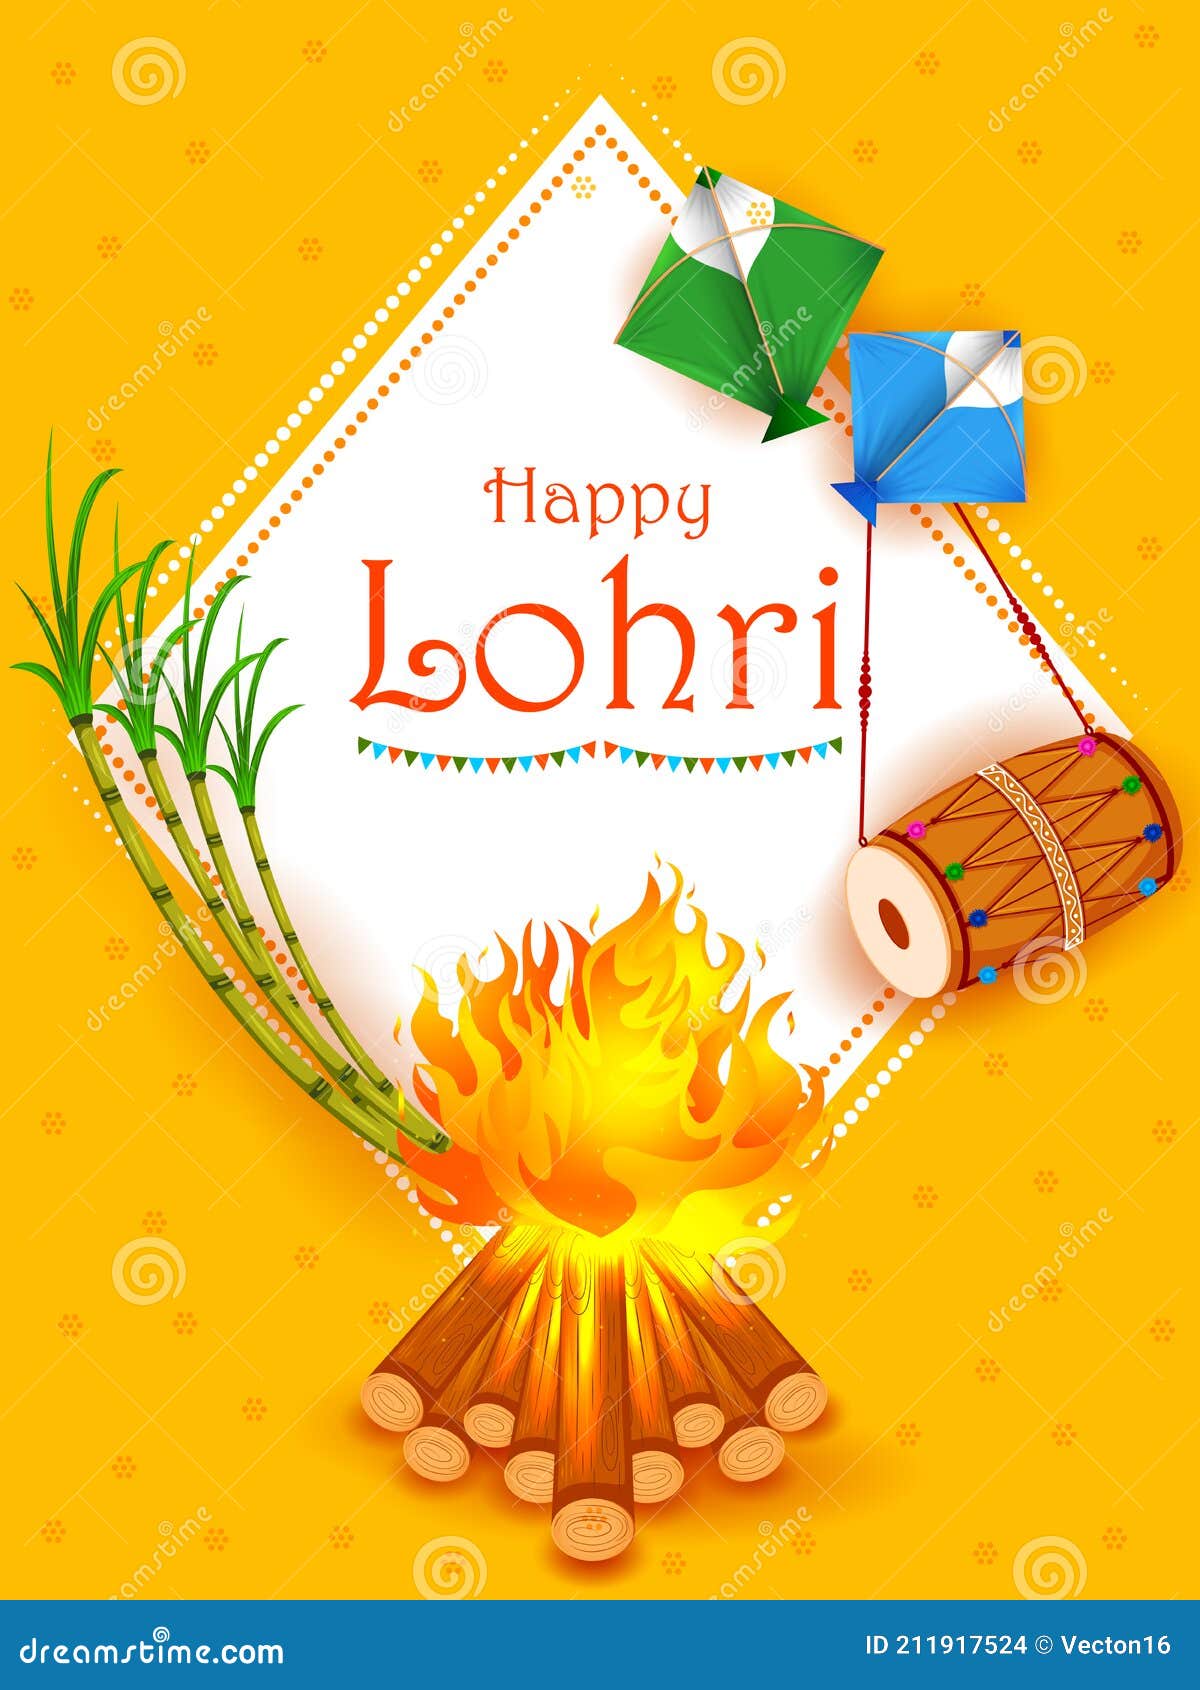 Holiday Greetings Background for Celebrating Harvest Festival of Punjab  India Lohri Stock Vector - Illustration of tradition, vector: 211917524